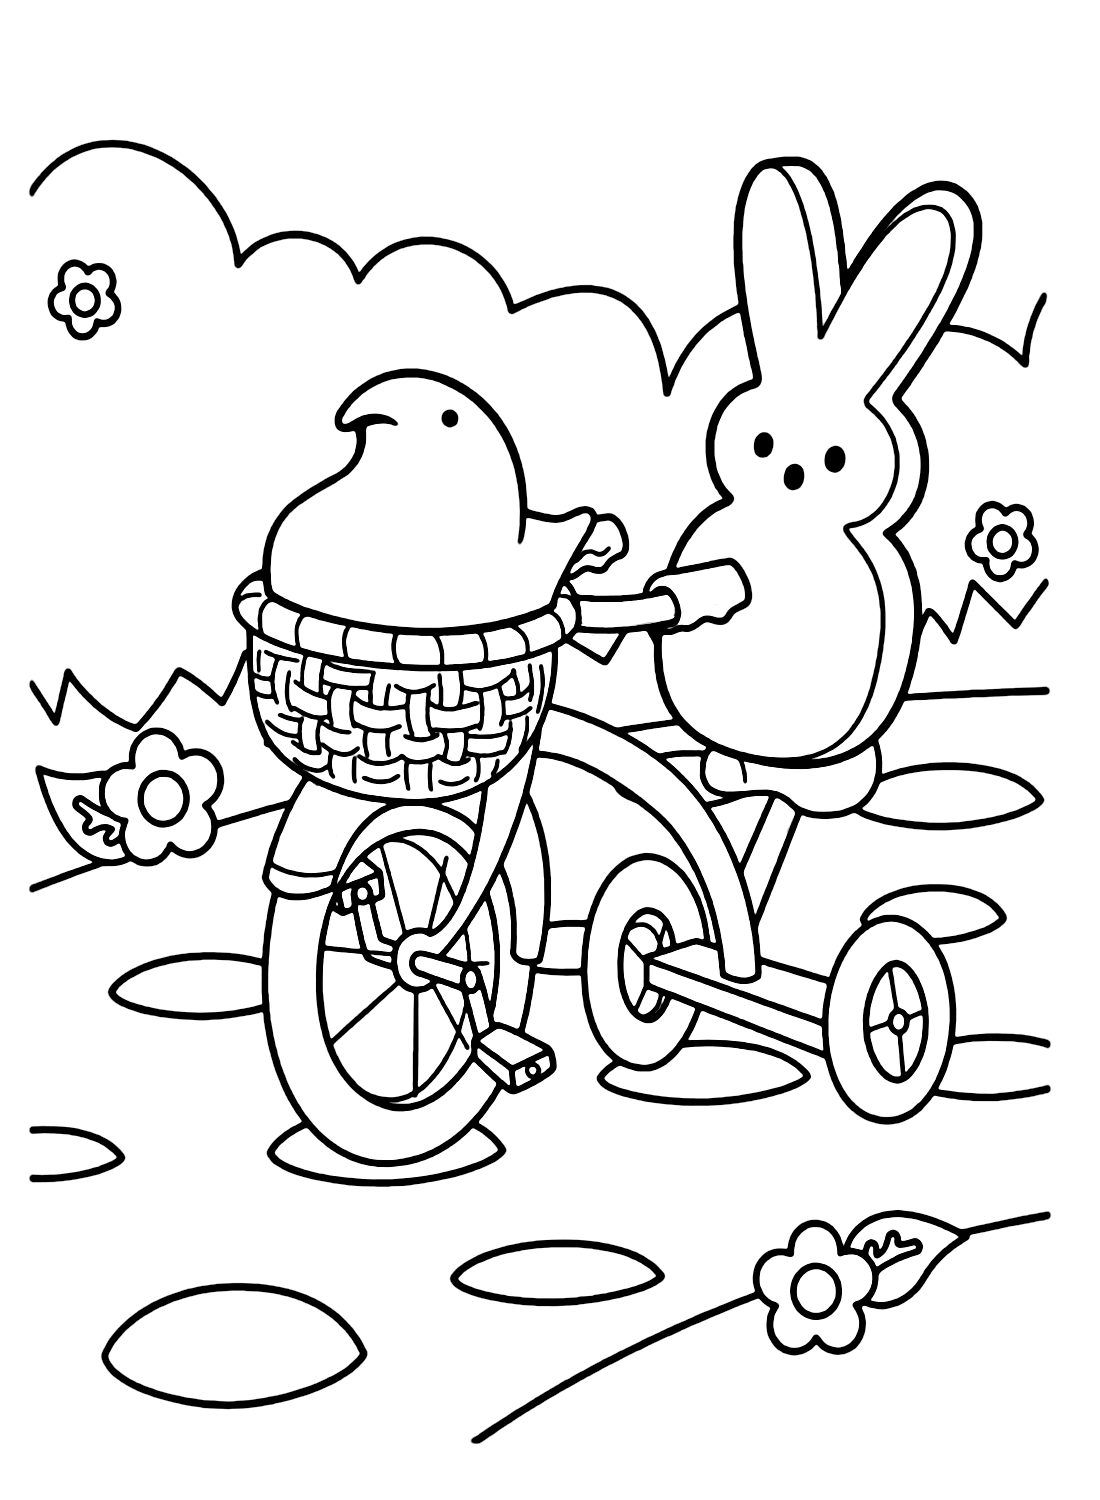 Rabbit and Chick Peeps Cycling Coloring Page